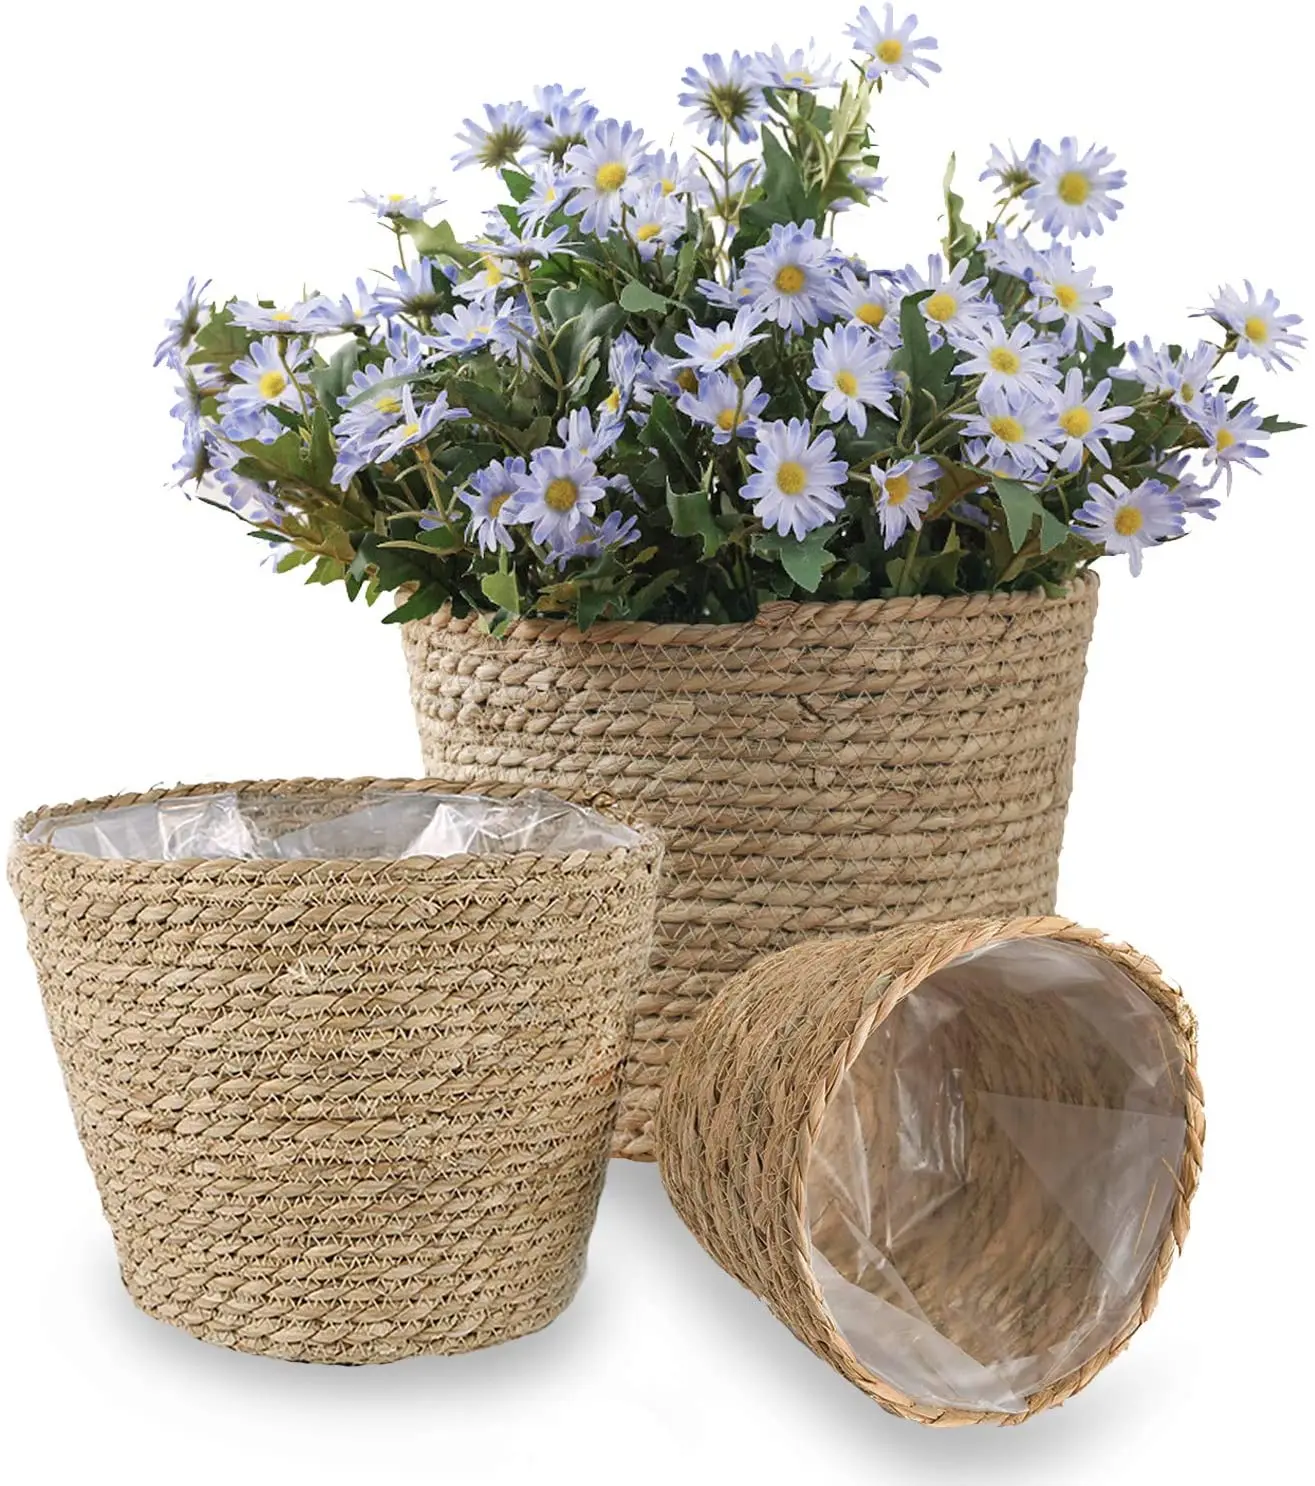 3 Handmade Seagrass Planter Basket Indoor Outdoor Flower Pots,Plant Containers (1600322185655)